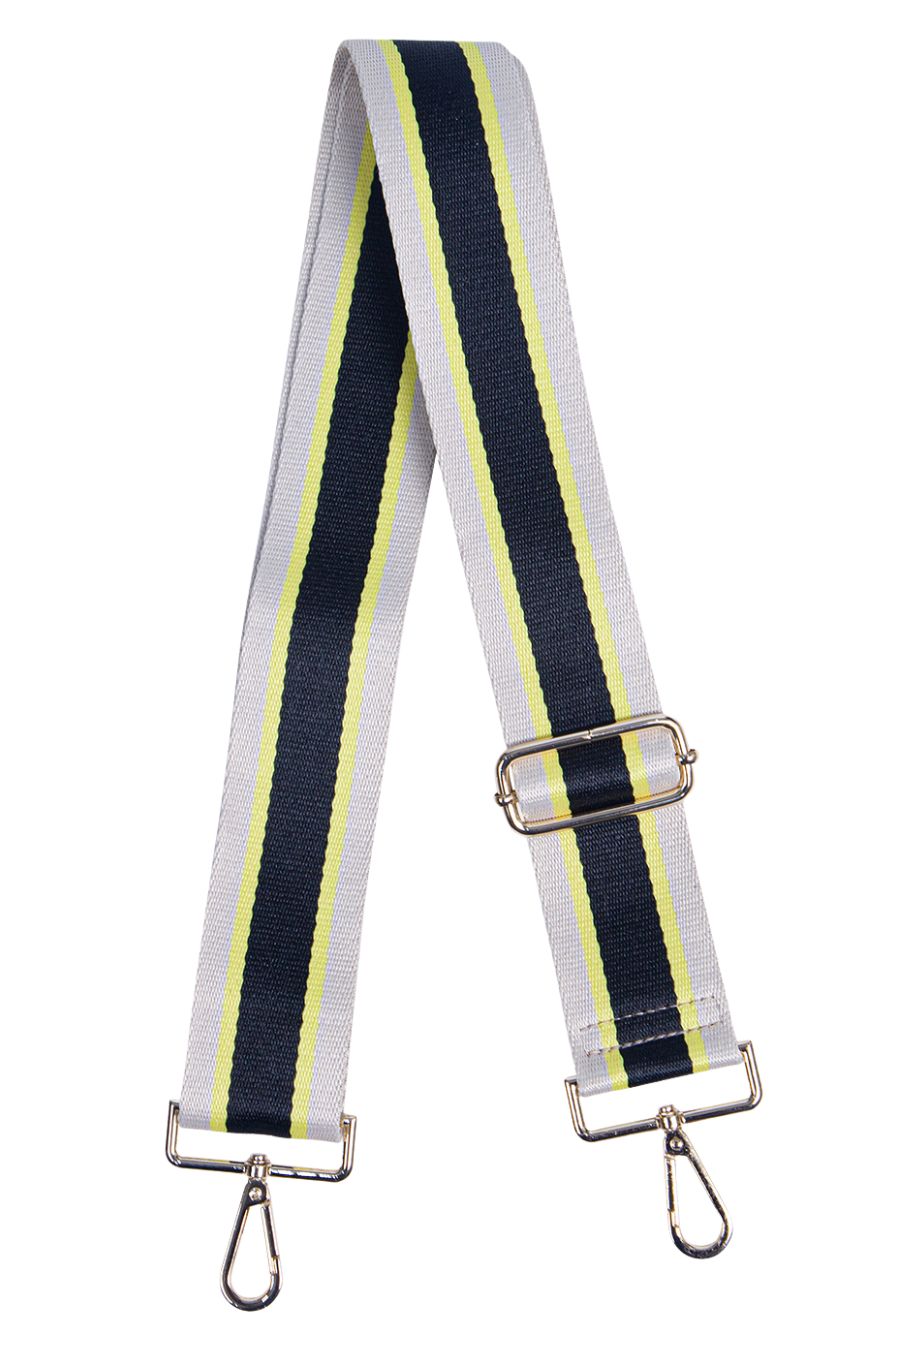 black, grey and neon yellow striped crossbody bag strap, adjustable , with gold hardware